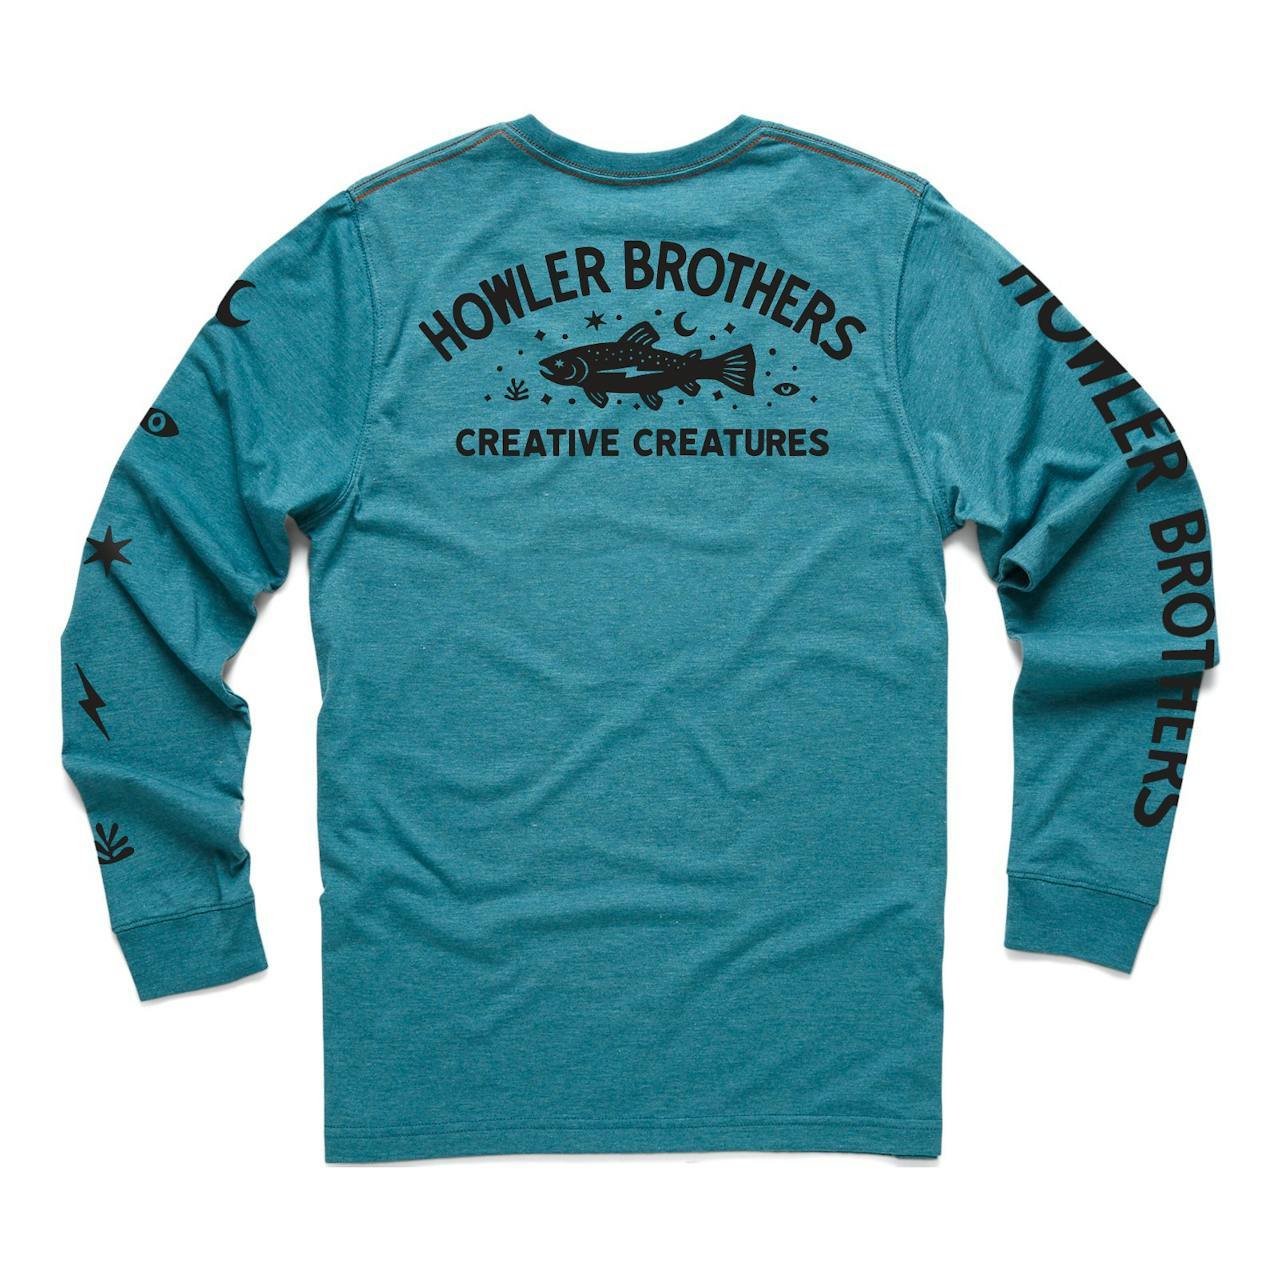 Howler Brothers Creative Creatures Trout Long Sleeve Tee